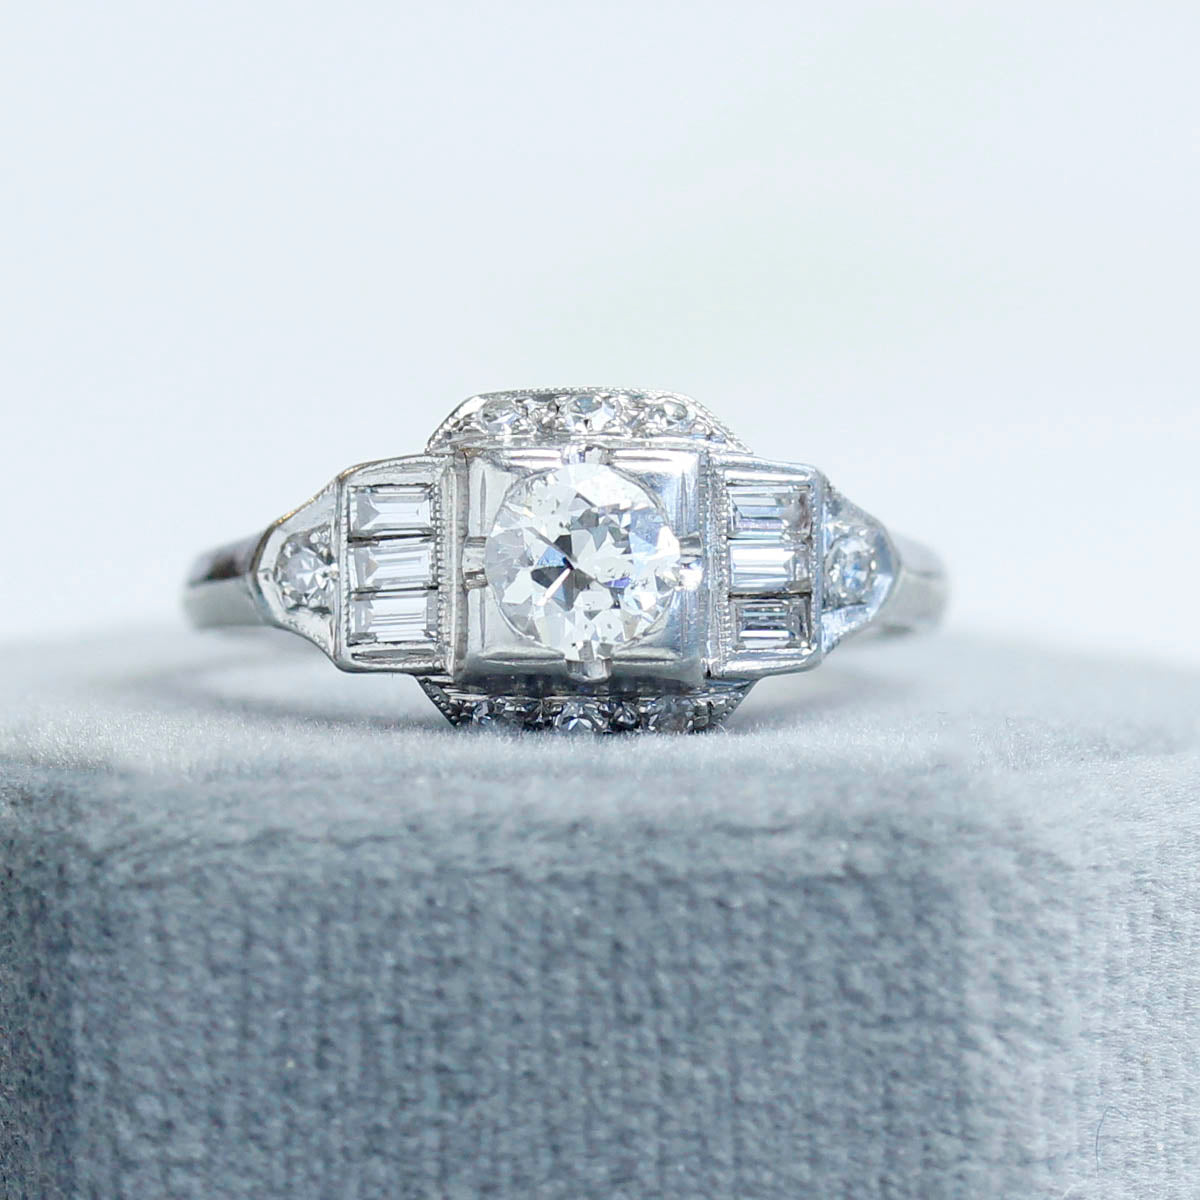 Art Deco 1930s Engagement Ring #VR180807-4 - Leigh Jay & Co